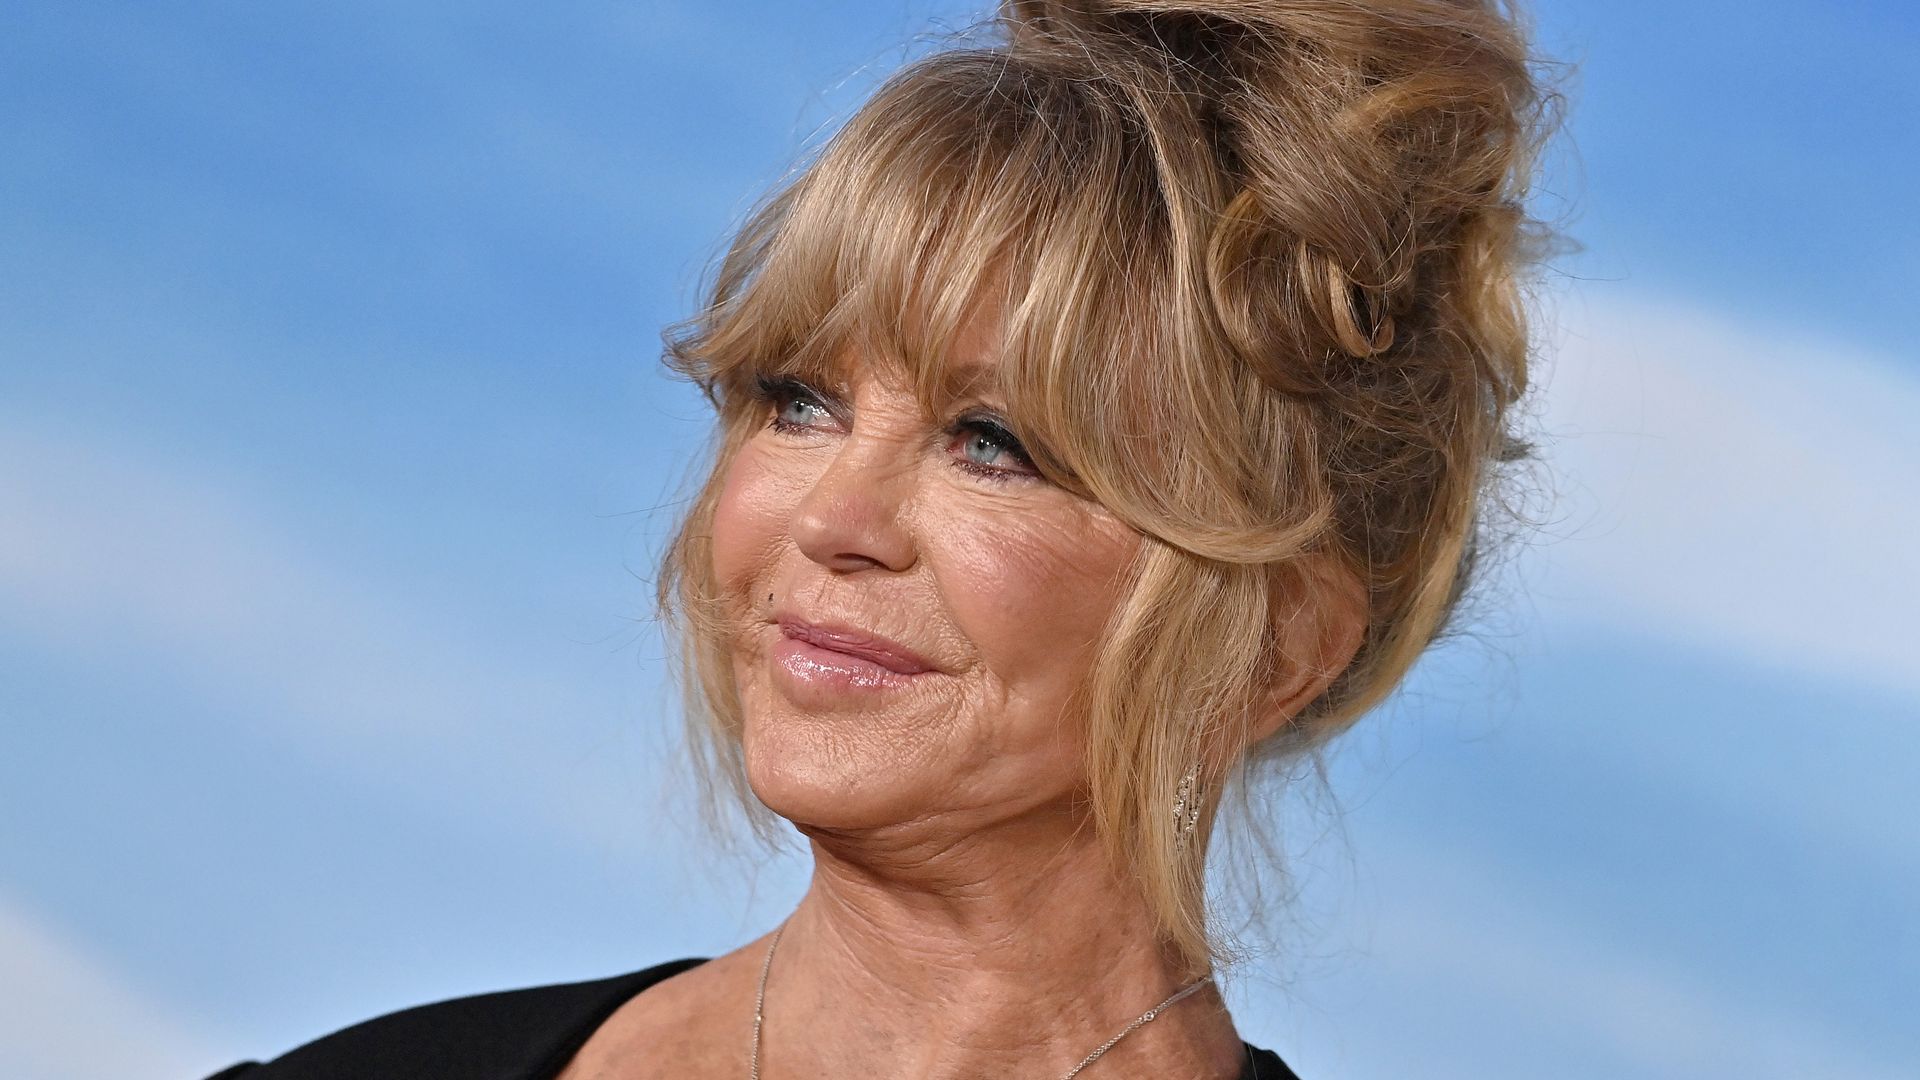 Goldie Hawn shares emotional tribute to late family member with throwback photo